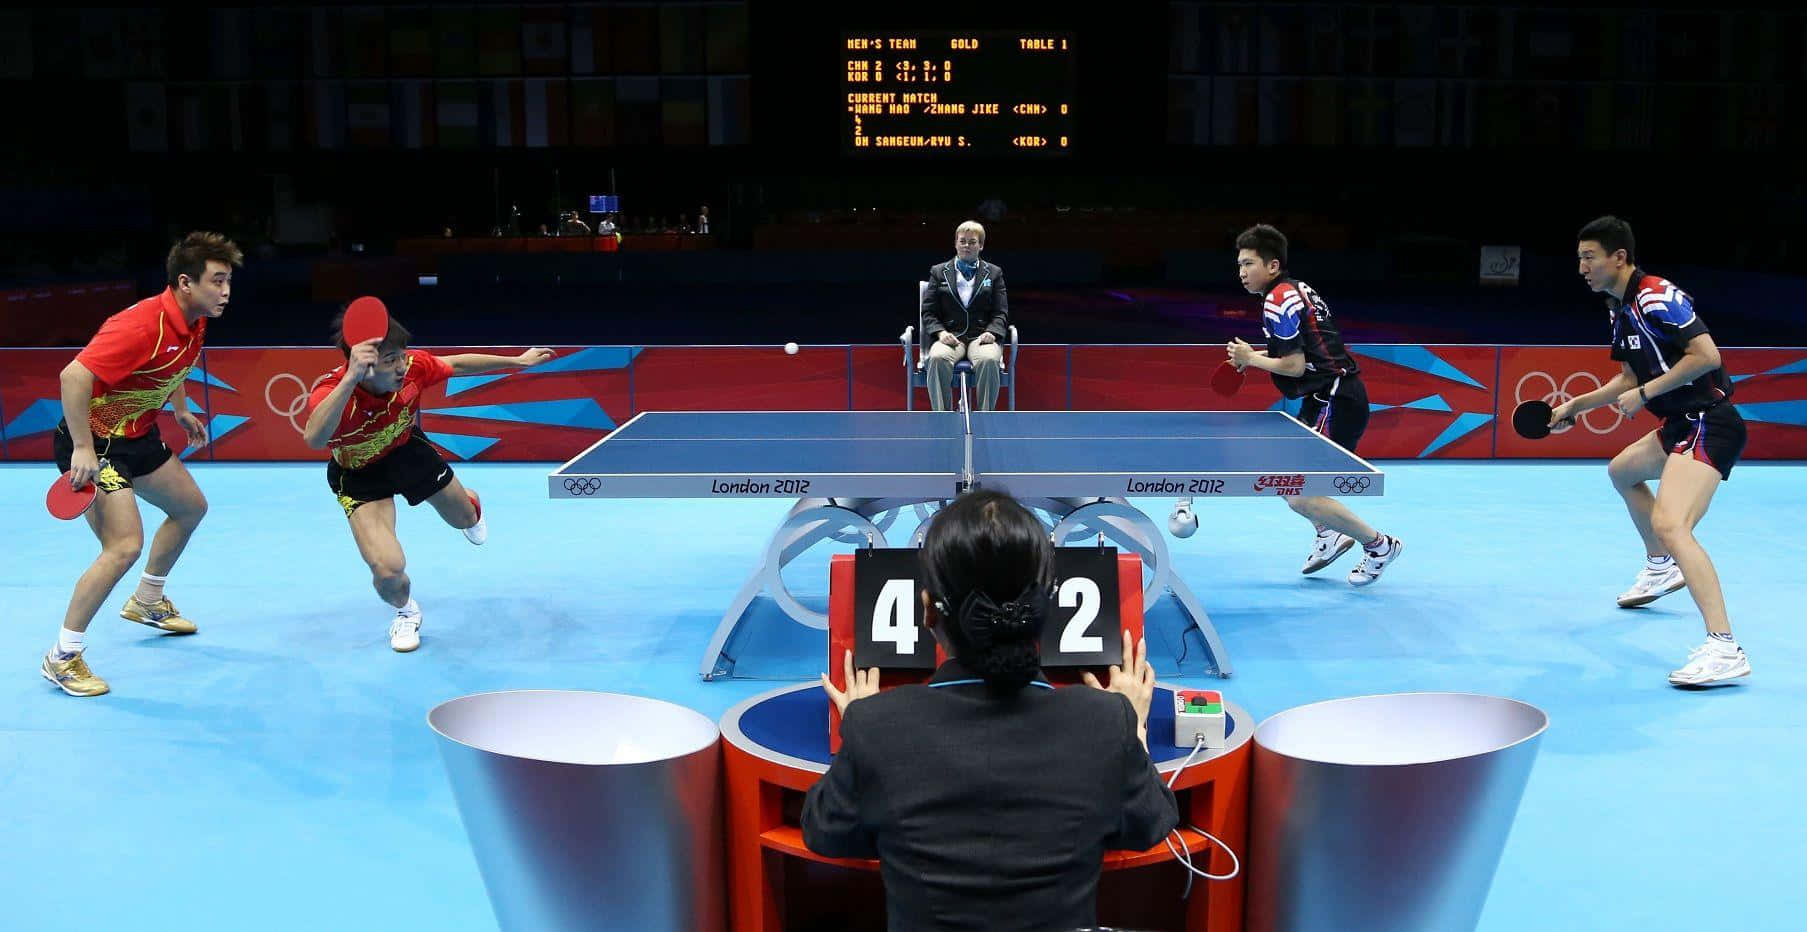 Download A Group Of People Playing Table Tennis In An Arena Wallpapers